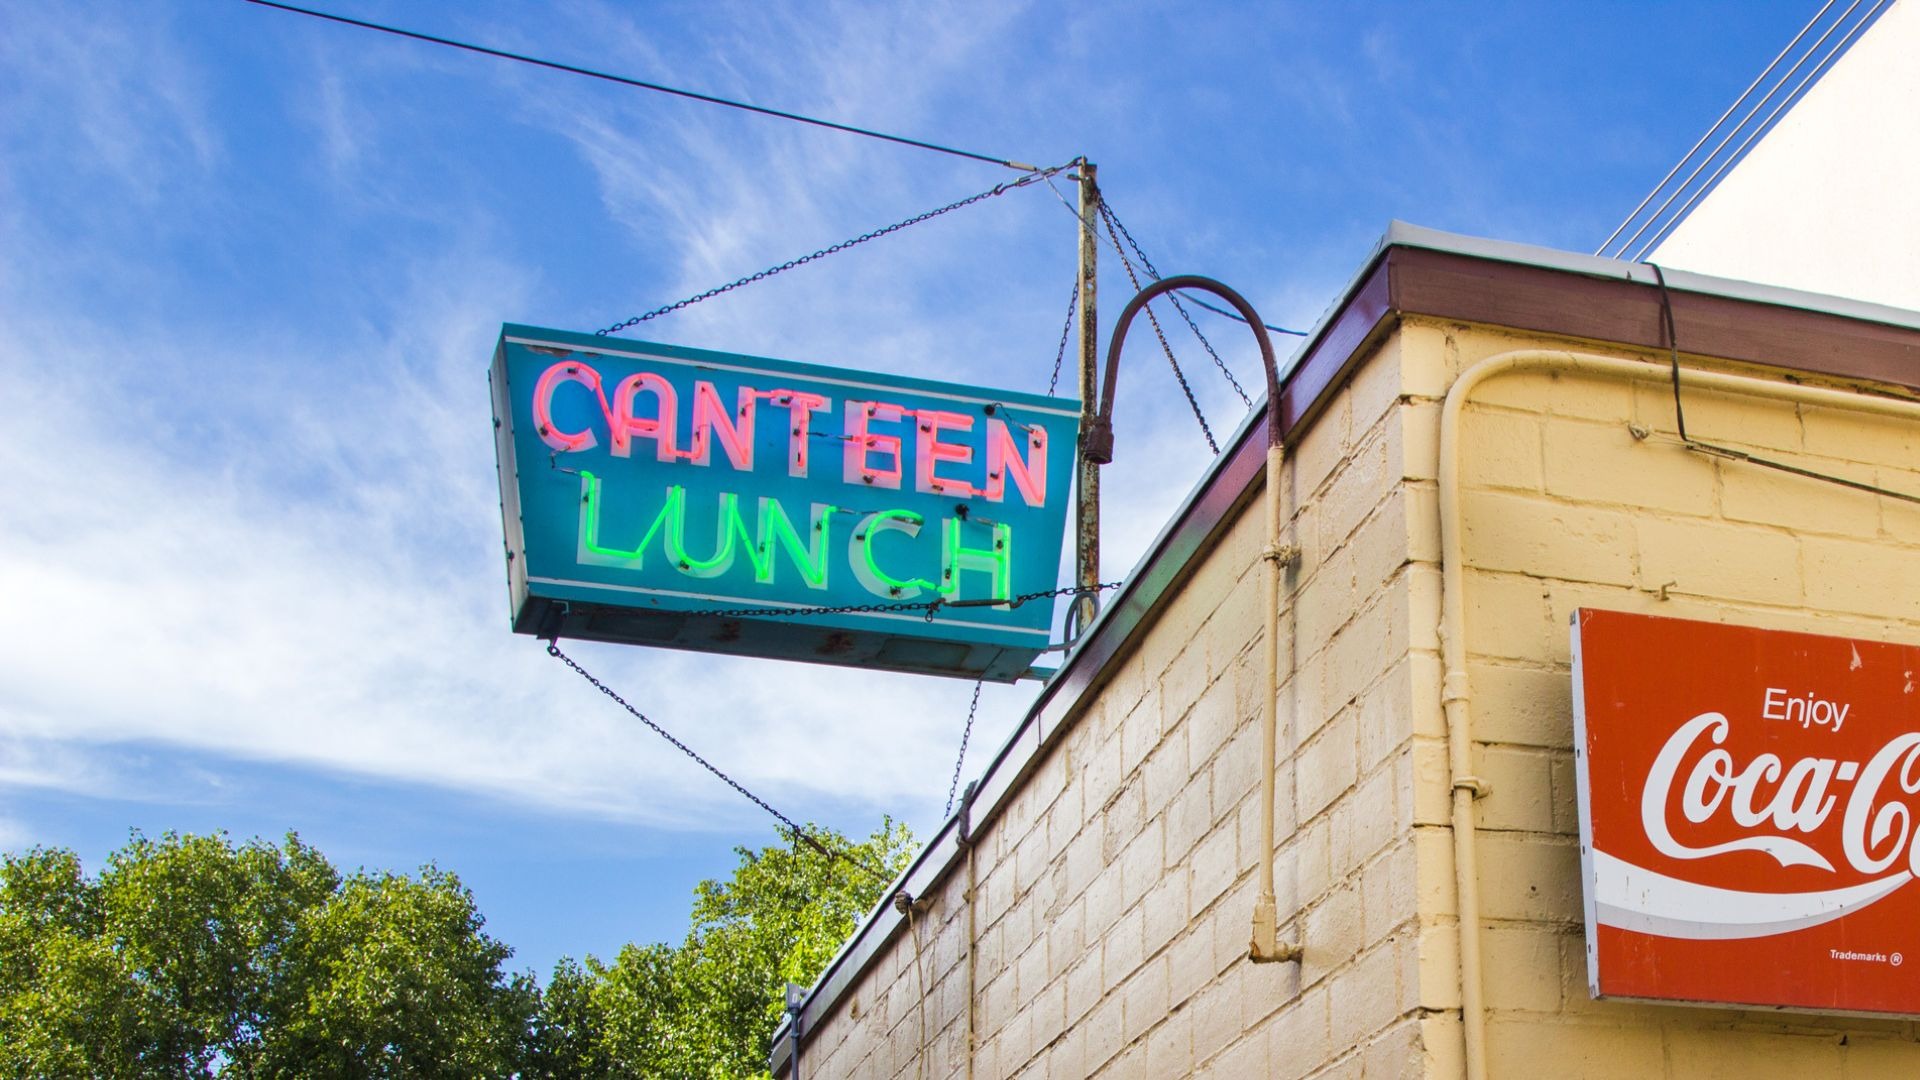 Canteen Lunch in the Alley's 95th Anniversary